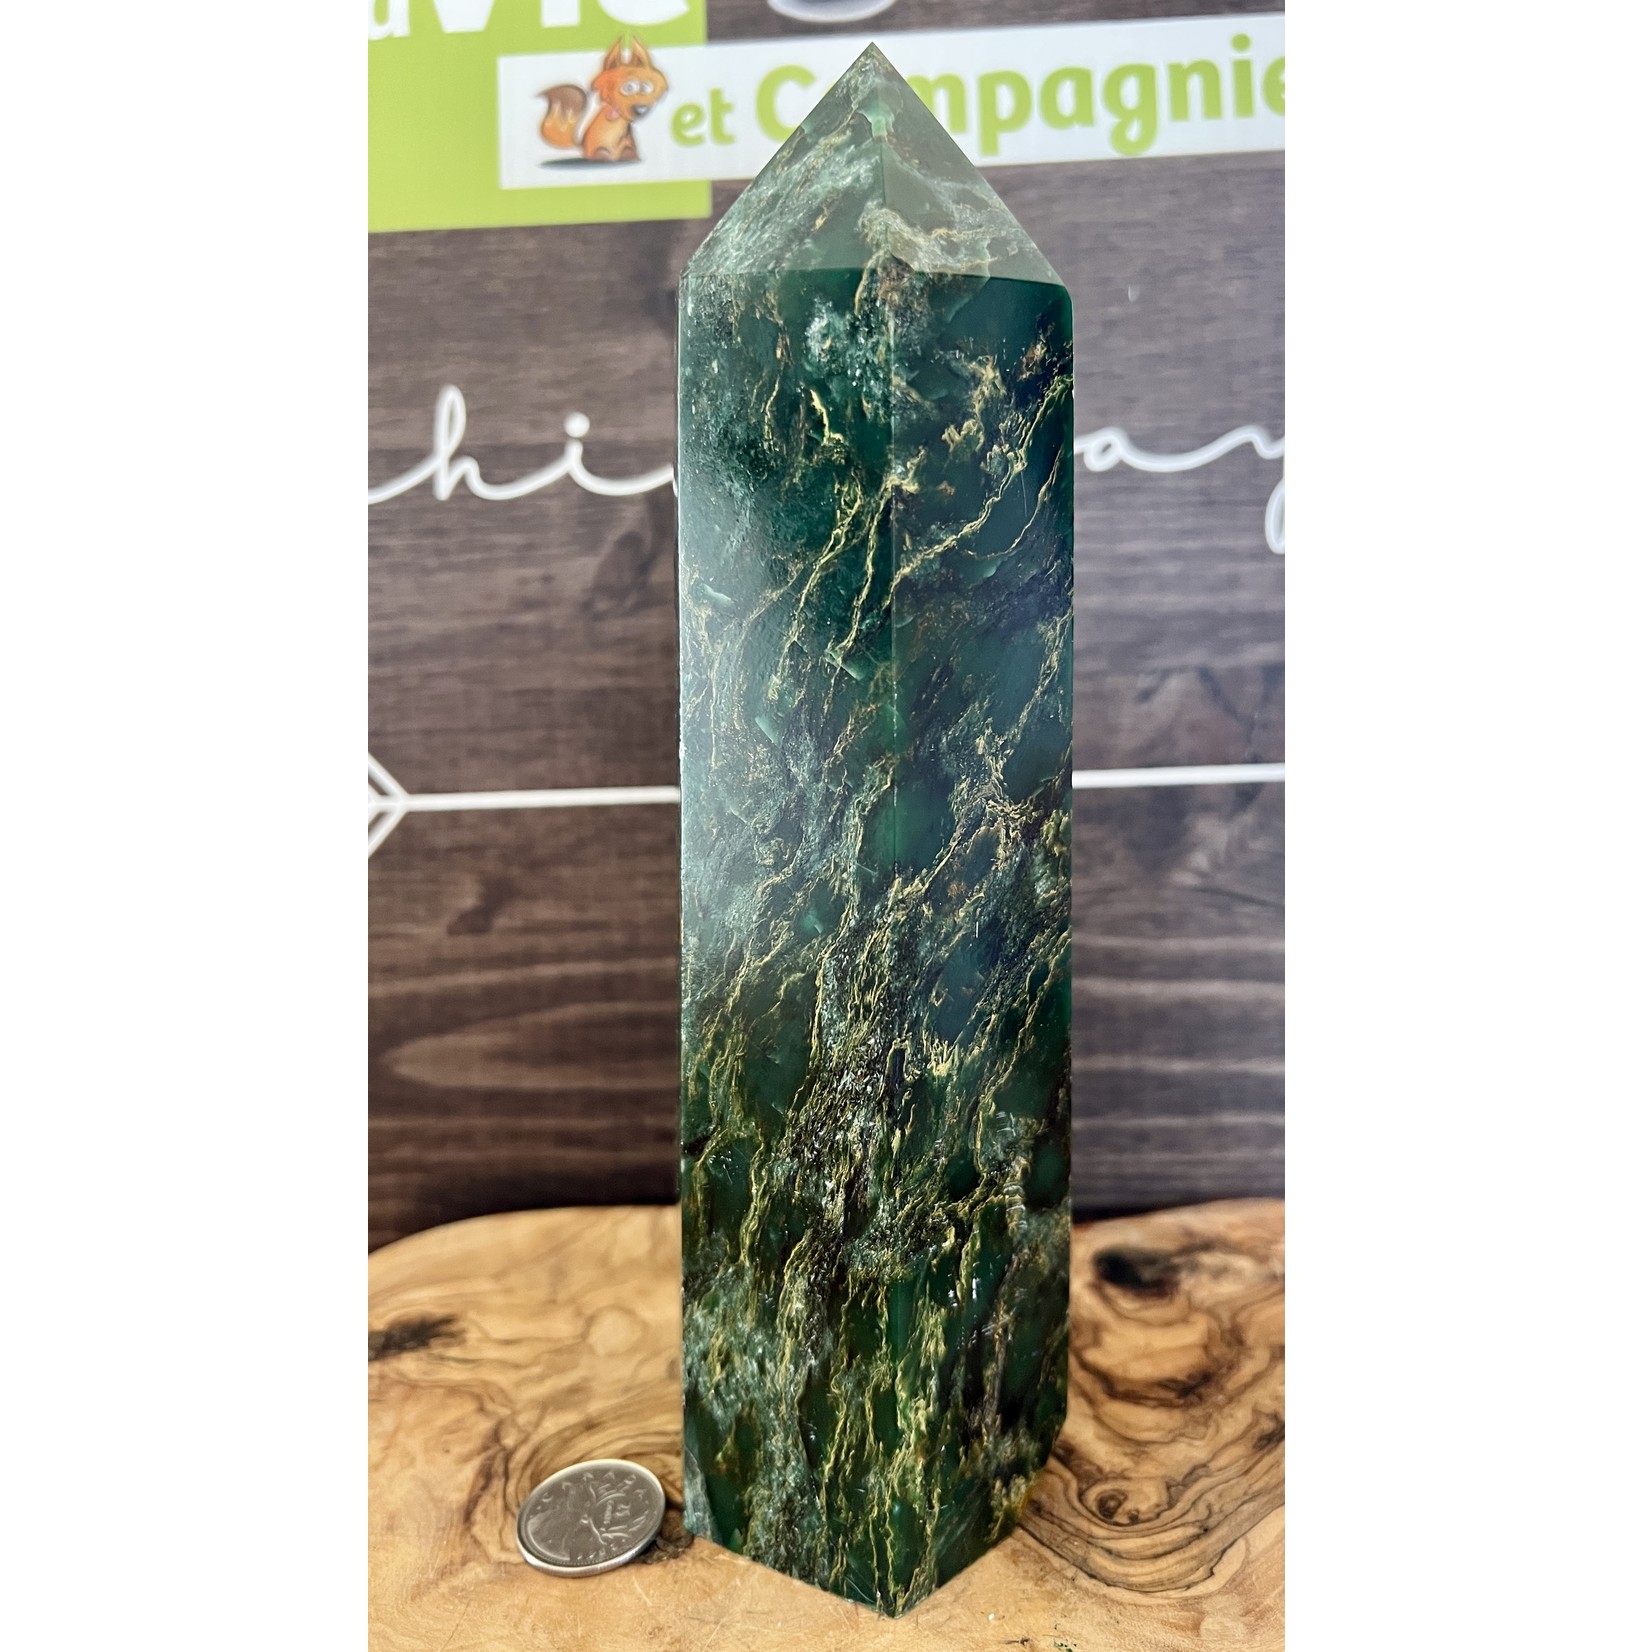 extra large emerald tower, helps strengthen the immune system, has the power to fight against viral diseases such as the flu angina pectoris